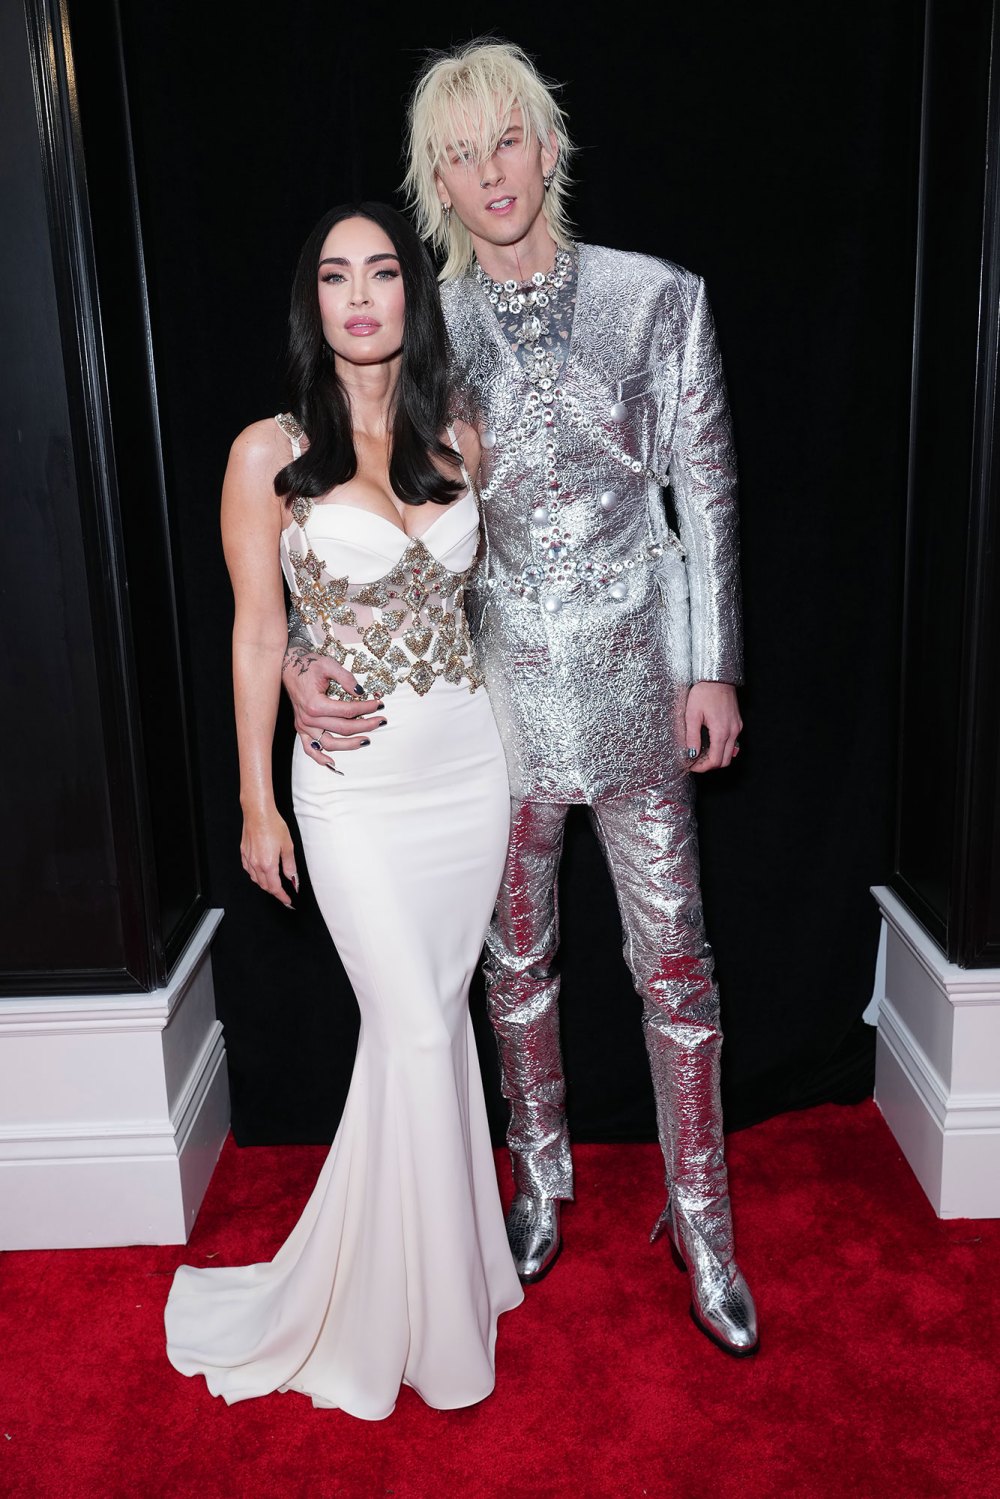 Machine Gun Kelly Celebrate His 34th Birthday With Megan Fox Amid Relationship Ups and Downs